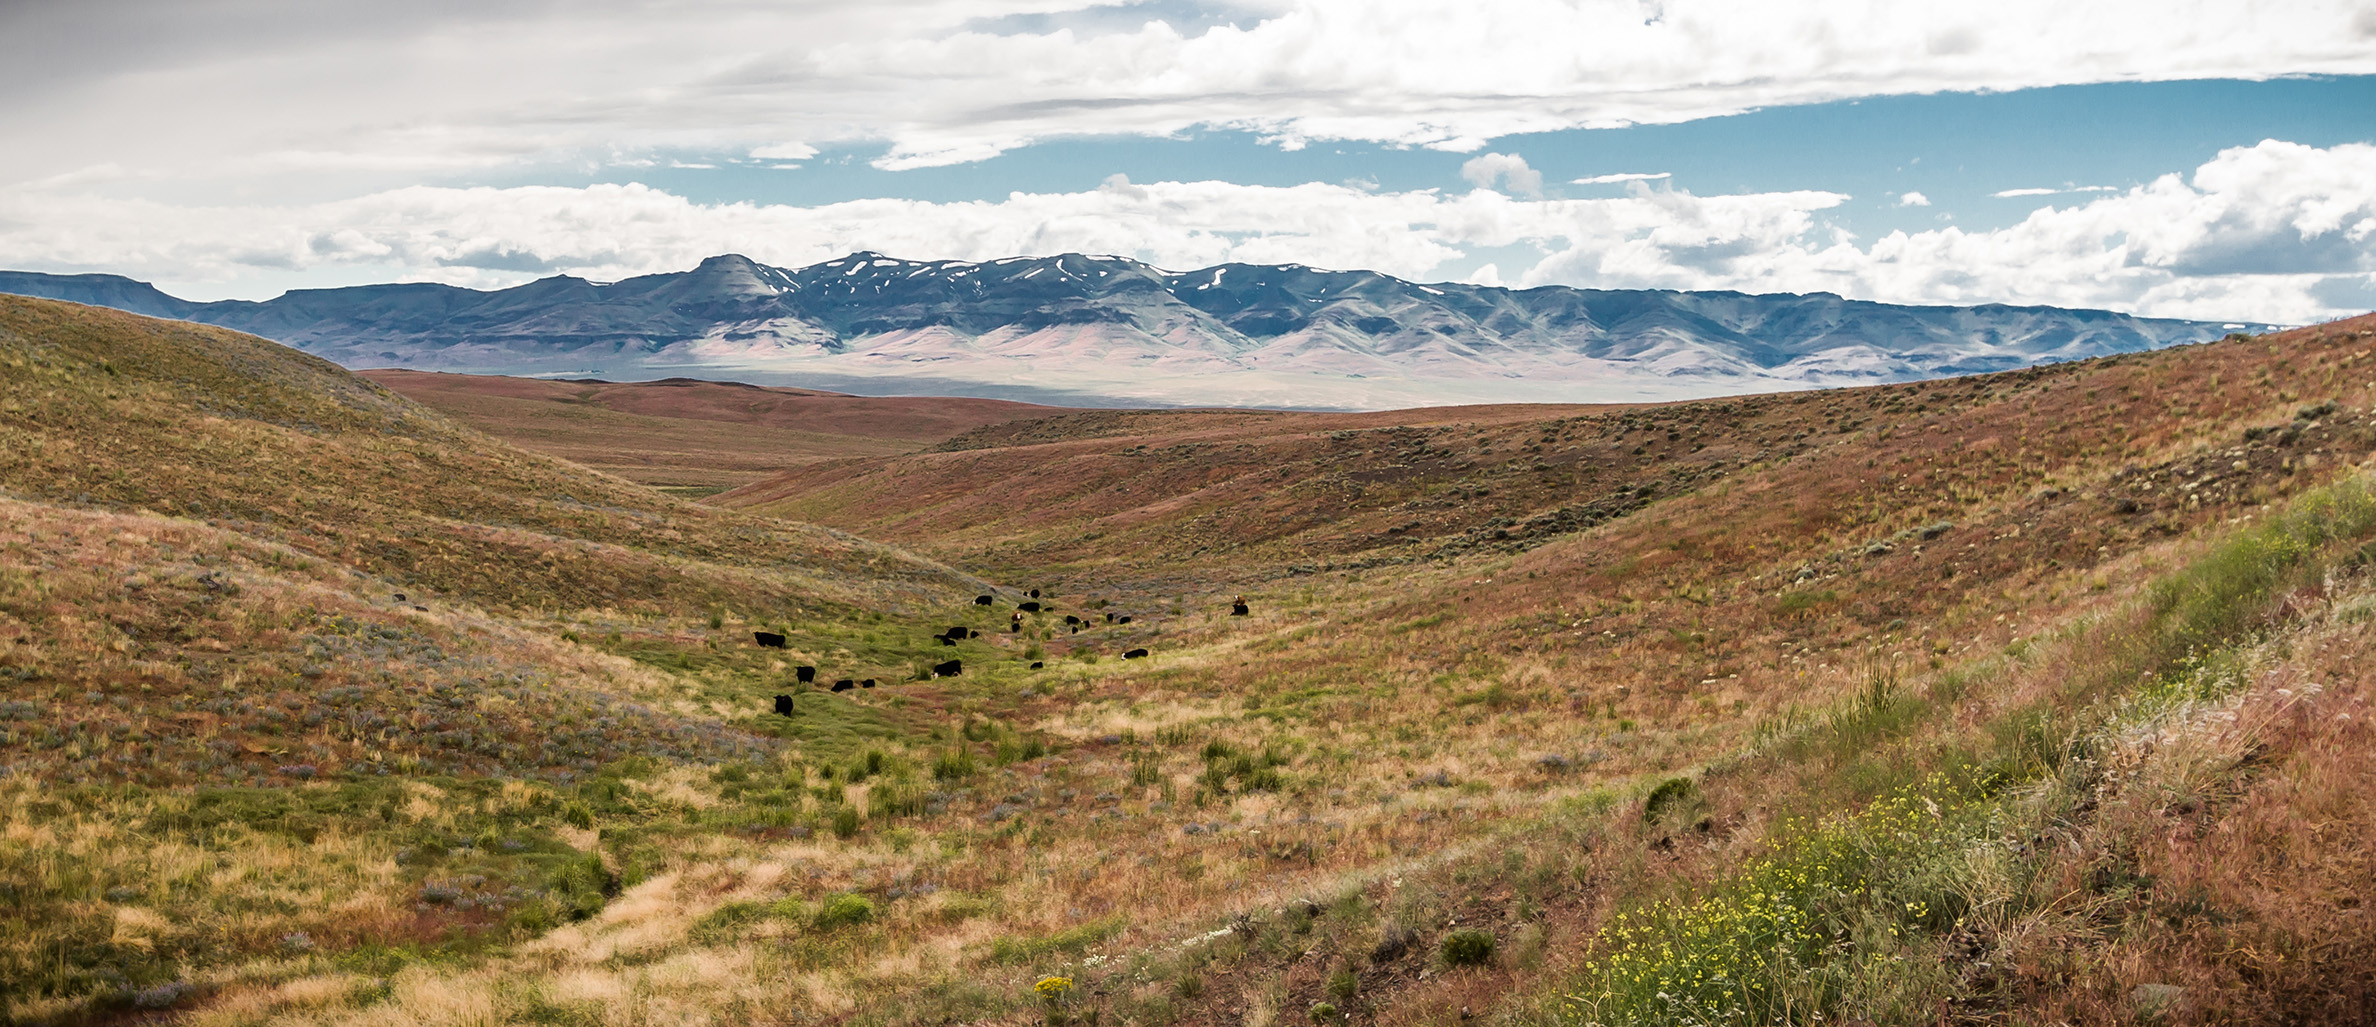 The landscape of NE Oregon is largely rolling rangelands, dotted with wildflowers and cattle